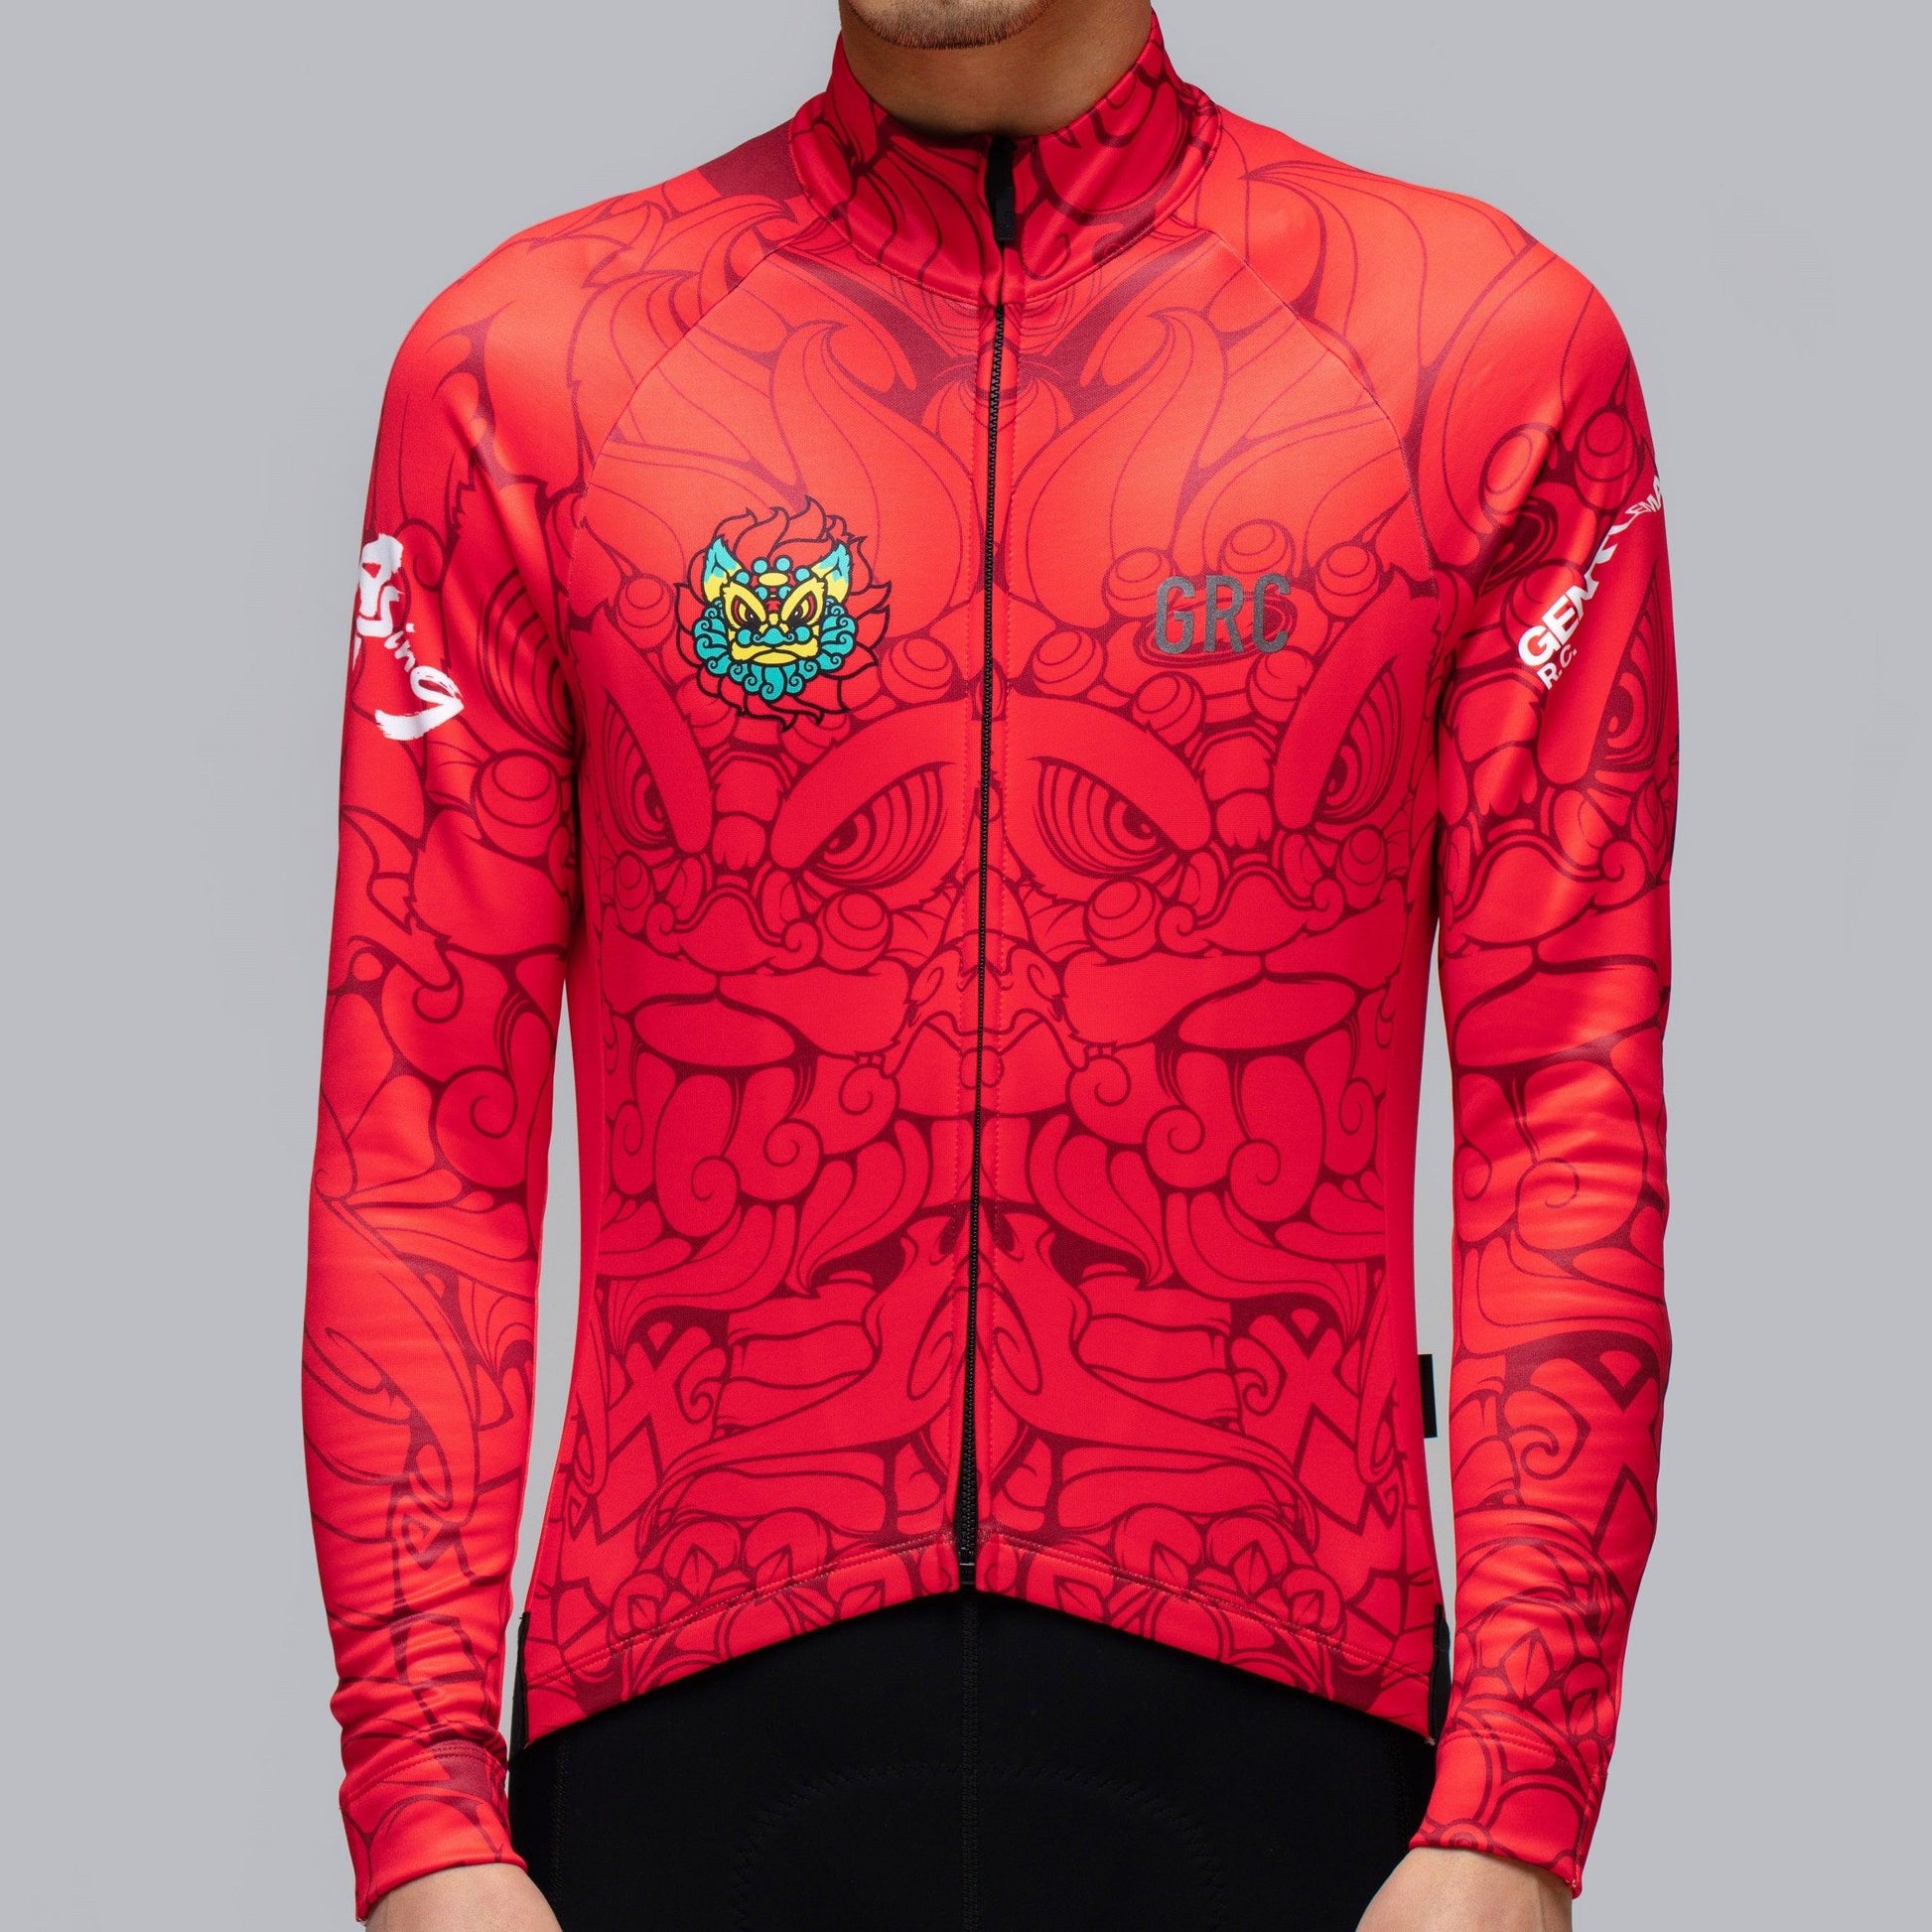 GRC × Asing Limited Winter Jacket - GRC Cycling Apparel